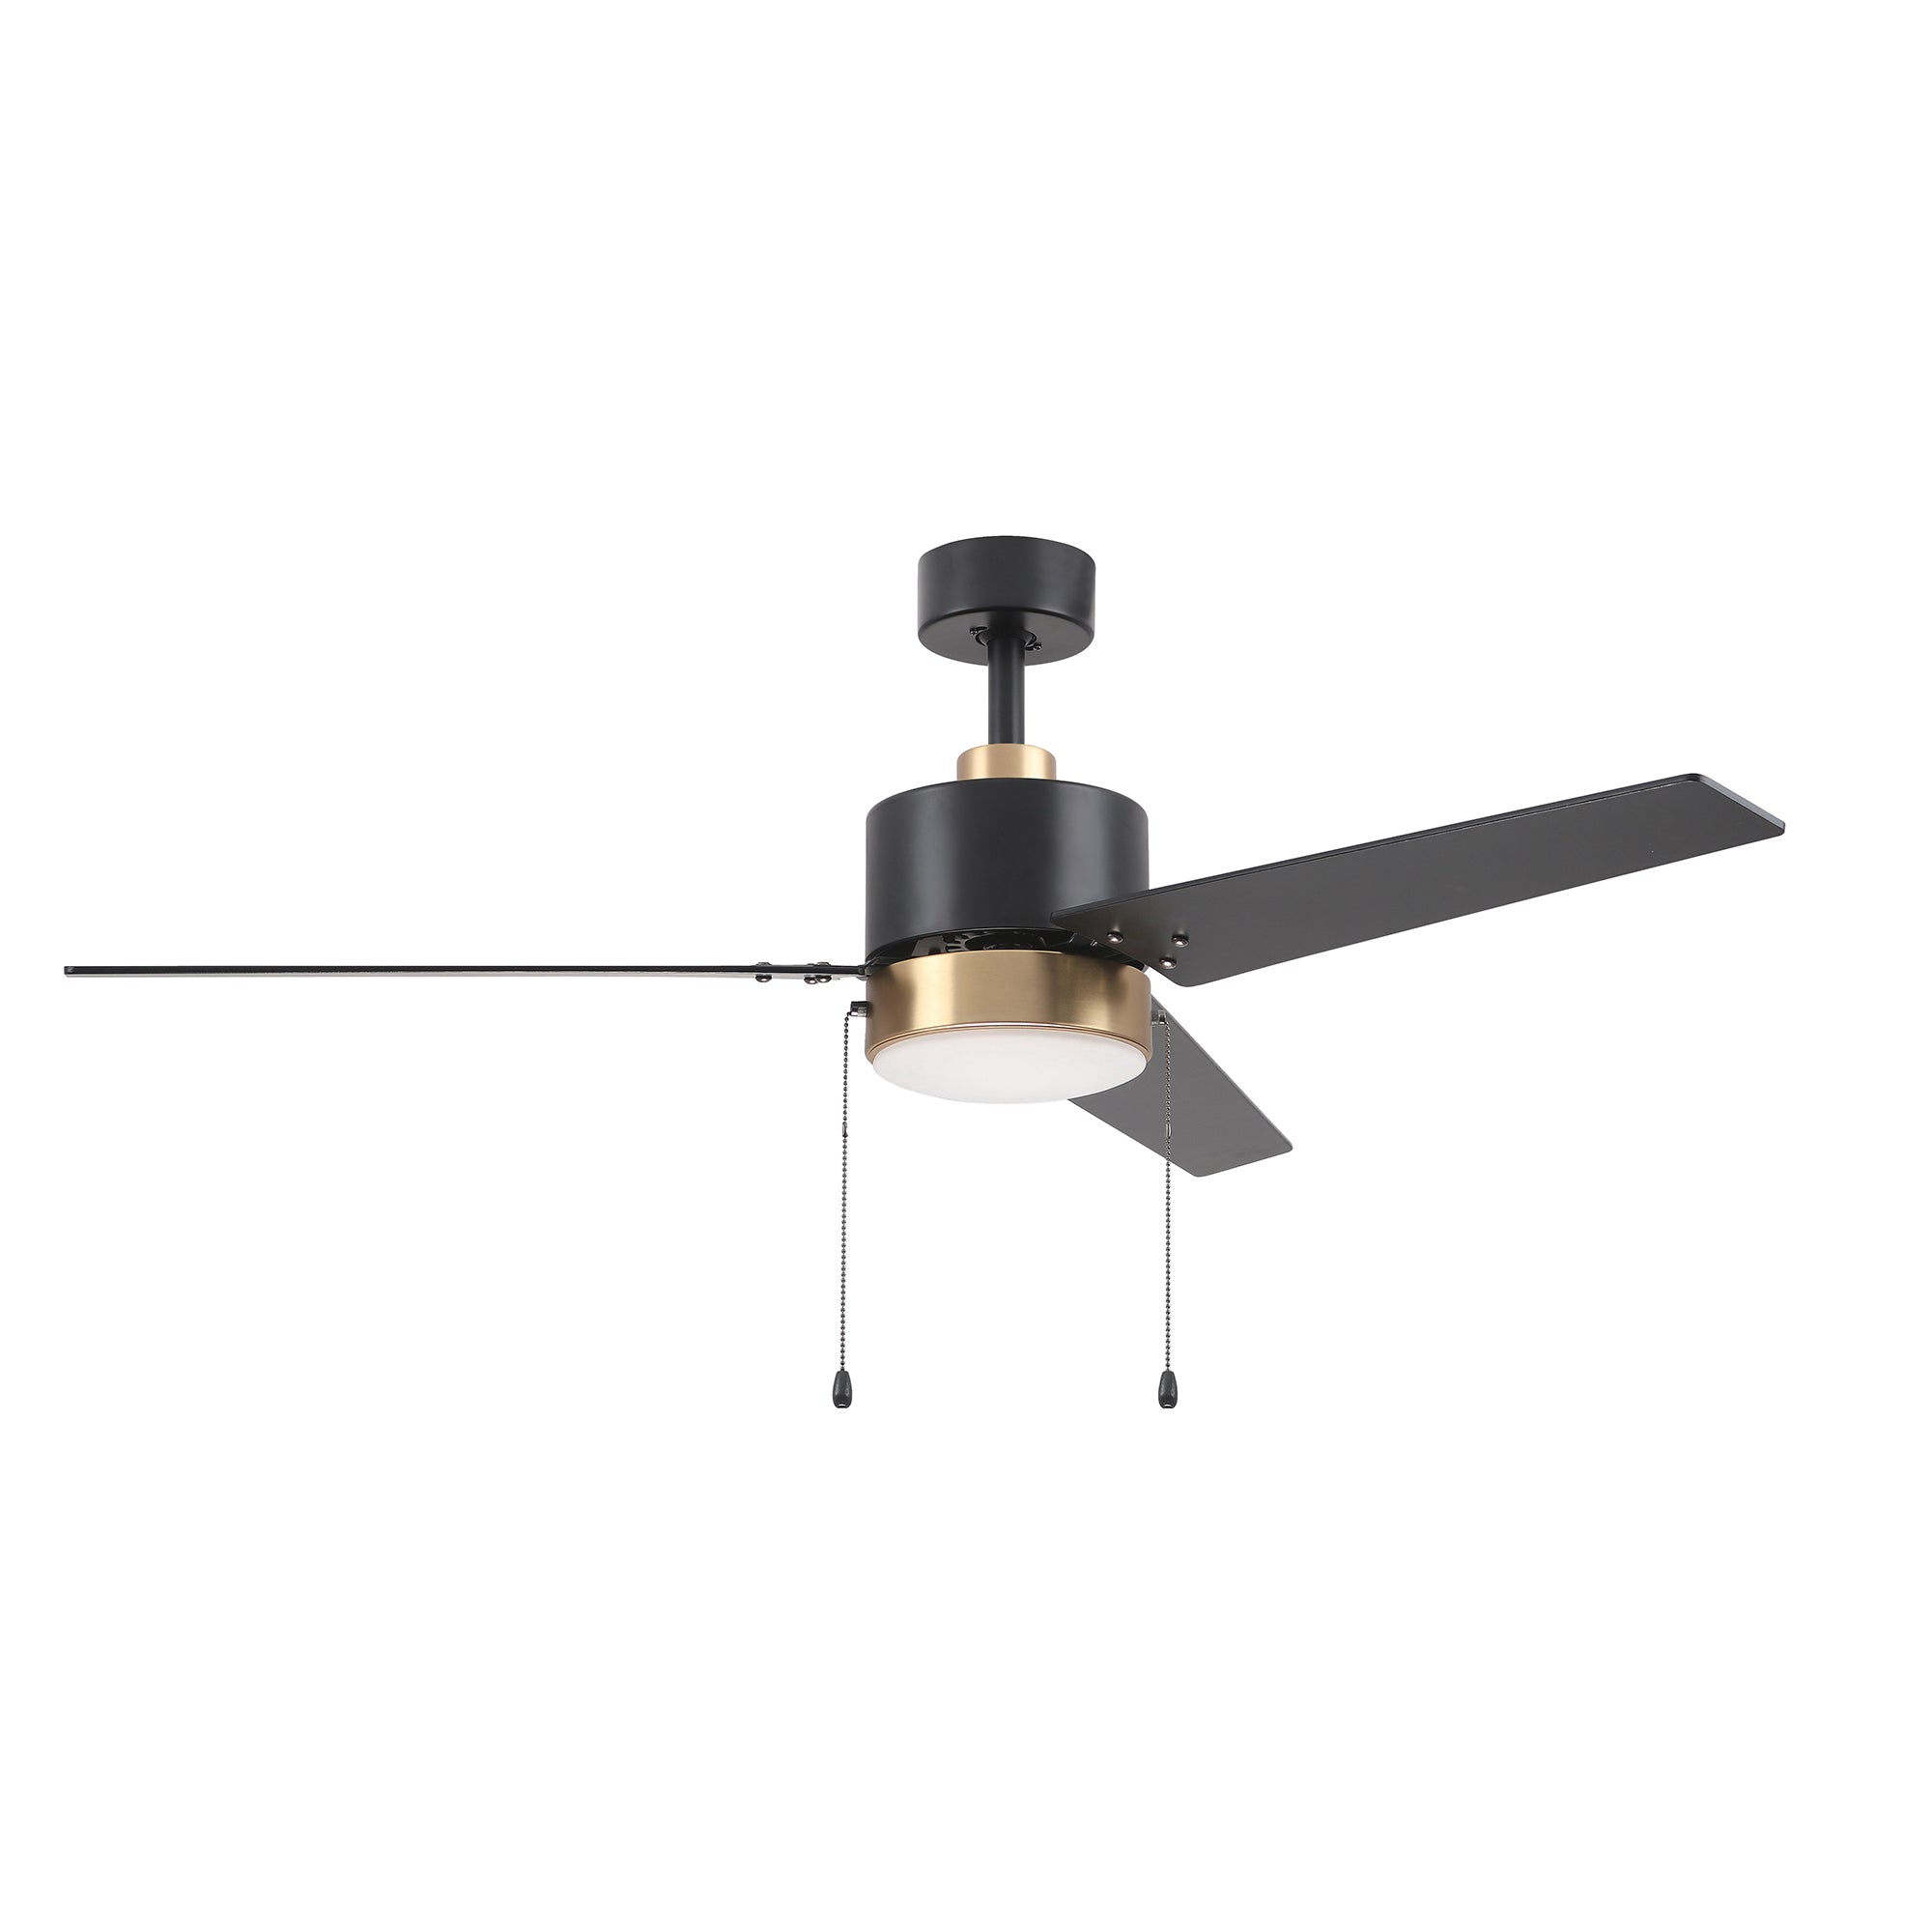 This Dulac 52&#39;&#39;Ceiling Fan keeps your space cool, bright, and stylish. It is a soft modern masterpiece perfect for your large indoor living spaces. This Model ceiling fan is a simplicity designing with White finish, use elegant Plywood blades and has an integrated 3000K LED warm light. The fan feature the pull chain switches to set fan speeds and lighting On/Off. 